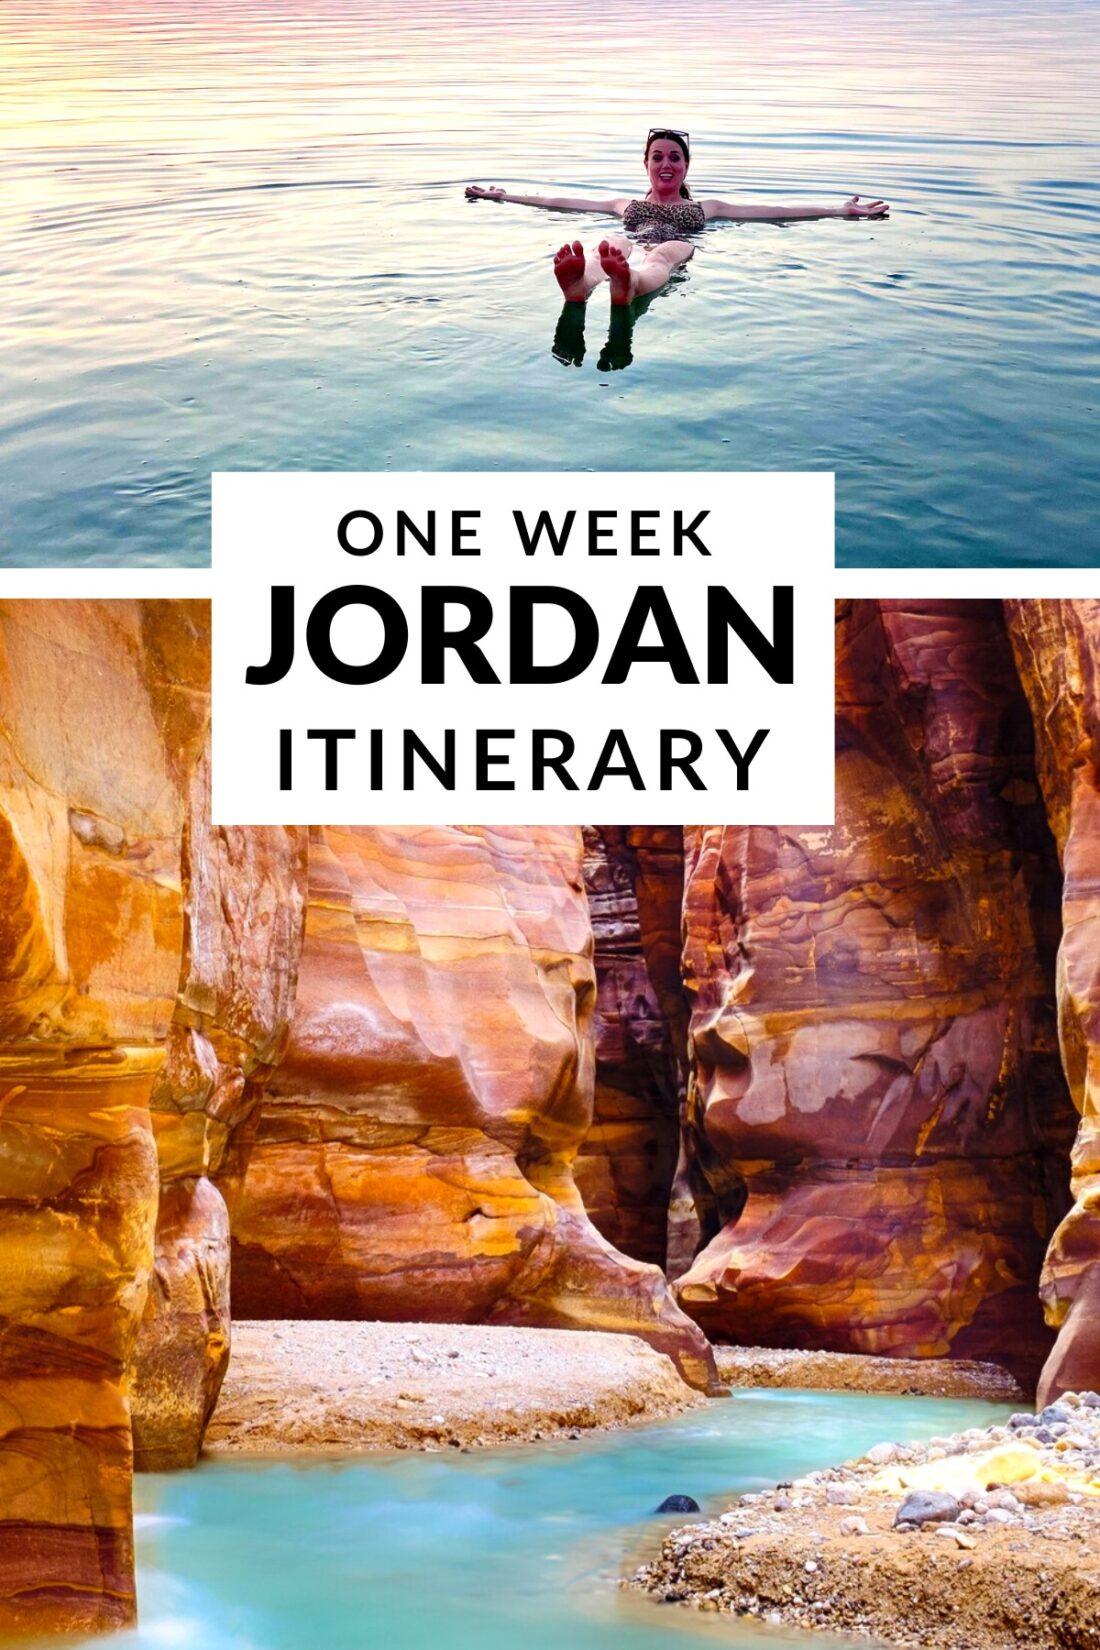 Jordan is an incredible country full of history and natural beauty. Here's what I did in one week in Jordan. 